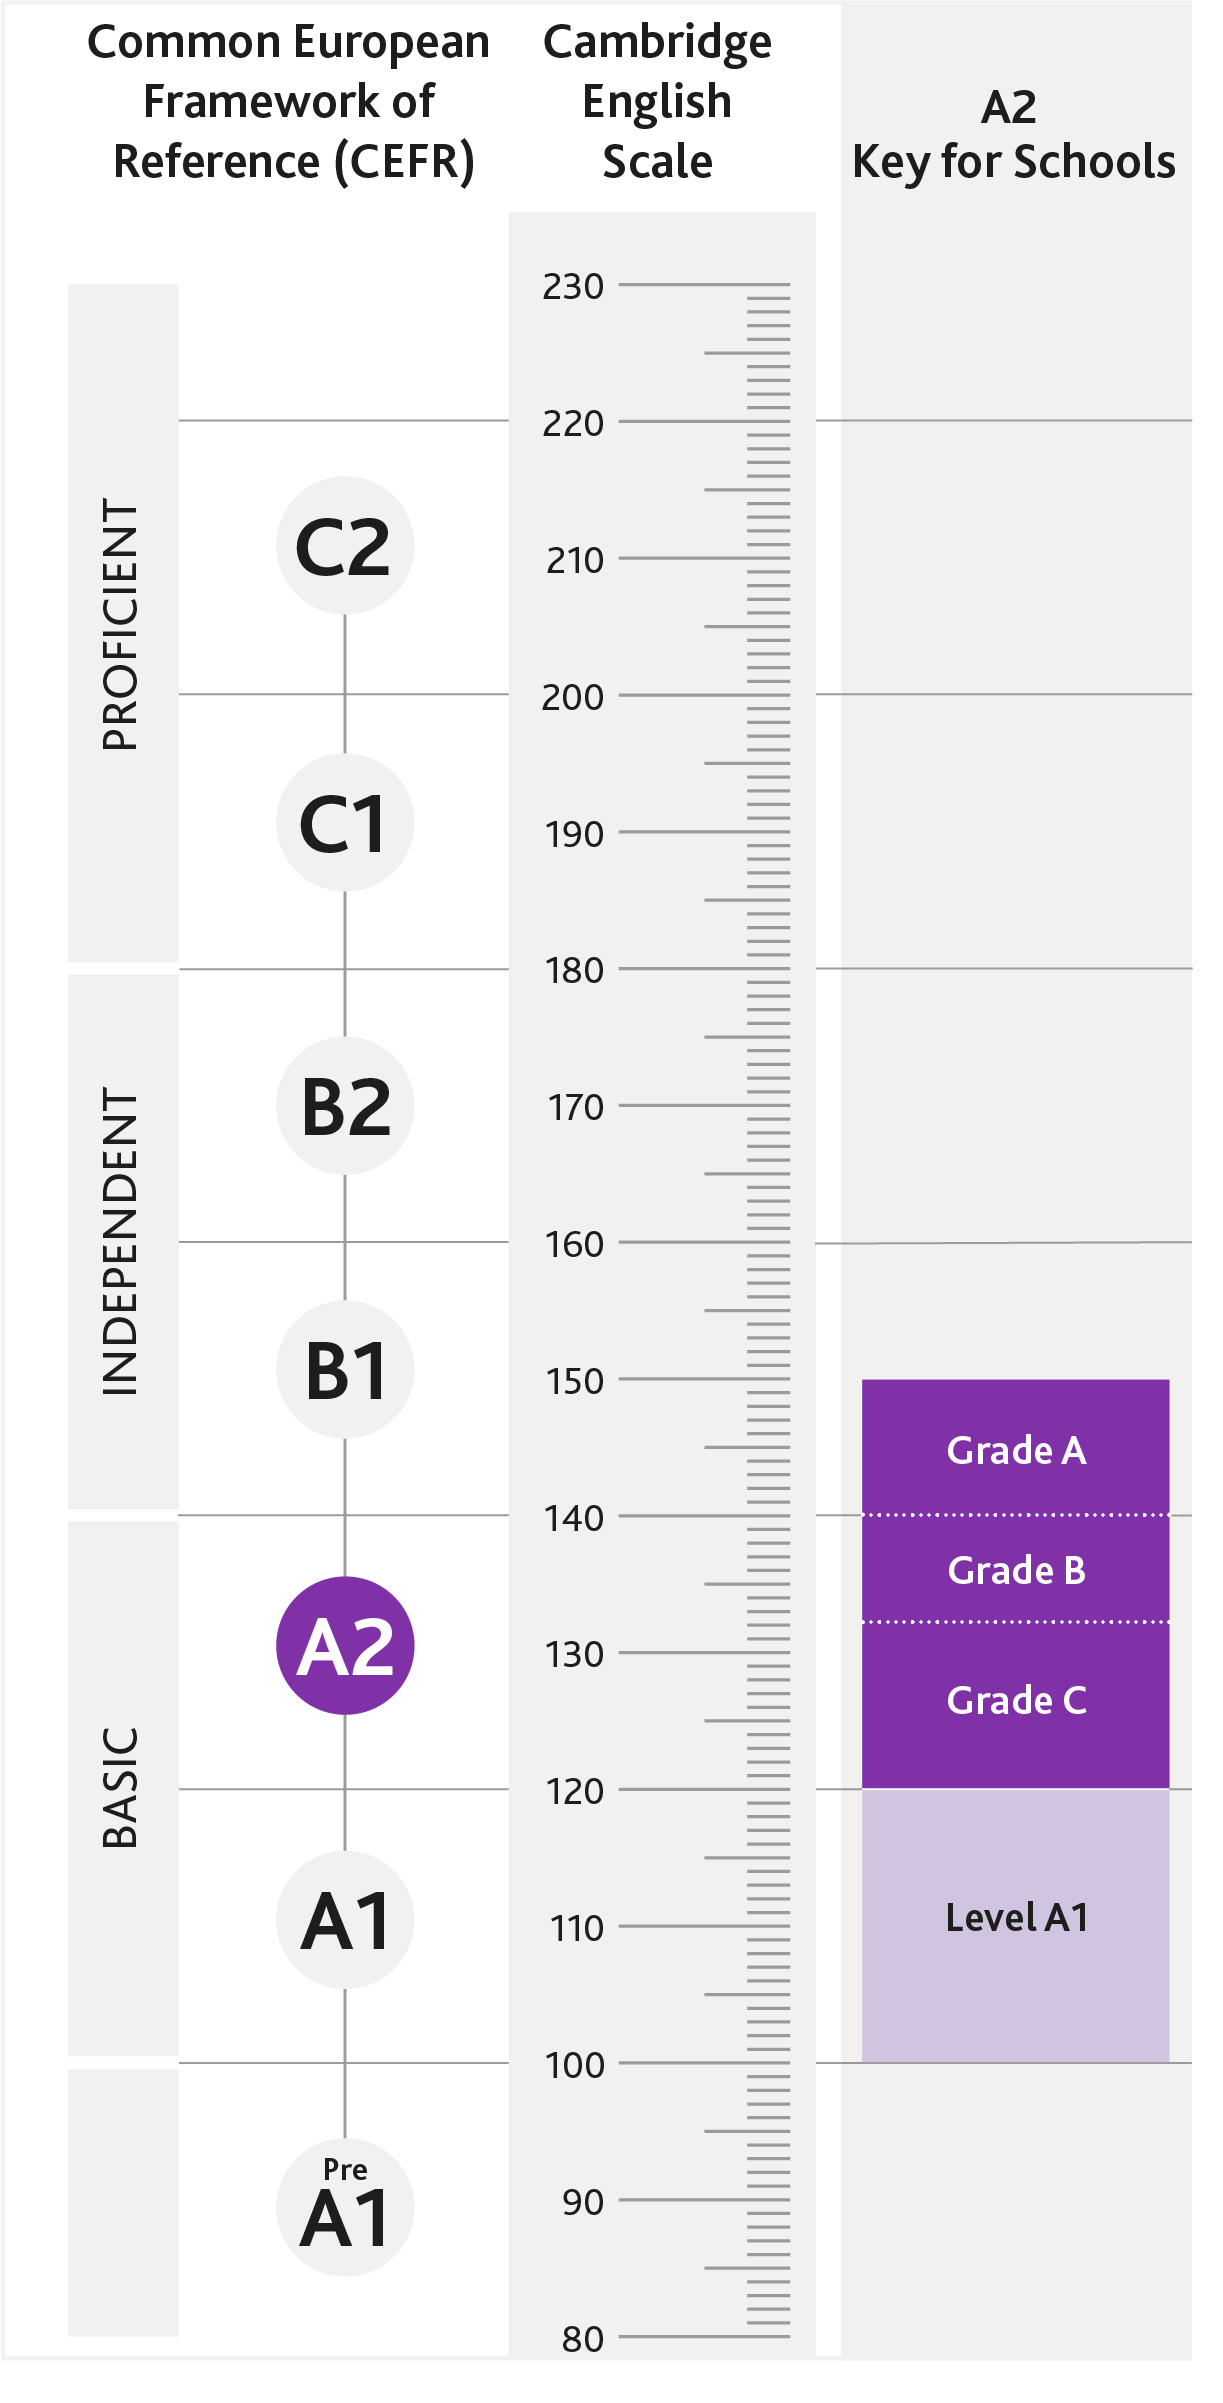 Diagram of where A2 Key for Schools is aligned on the CEFR and the Cambridge English Scale